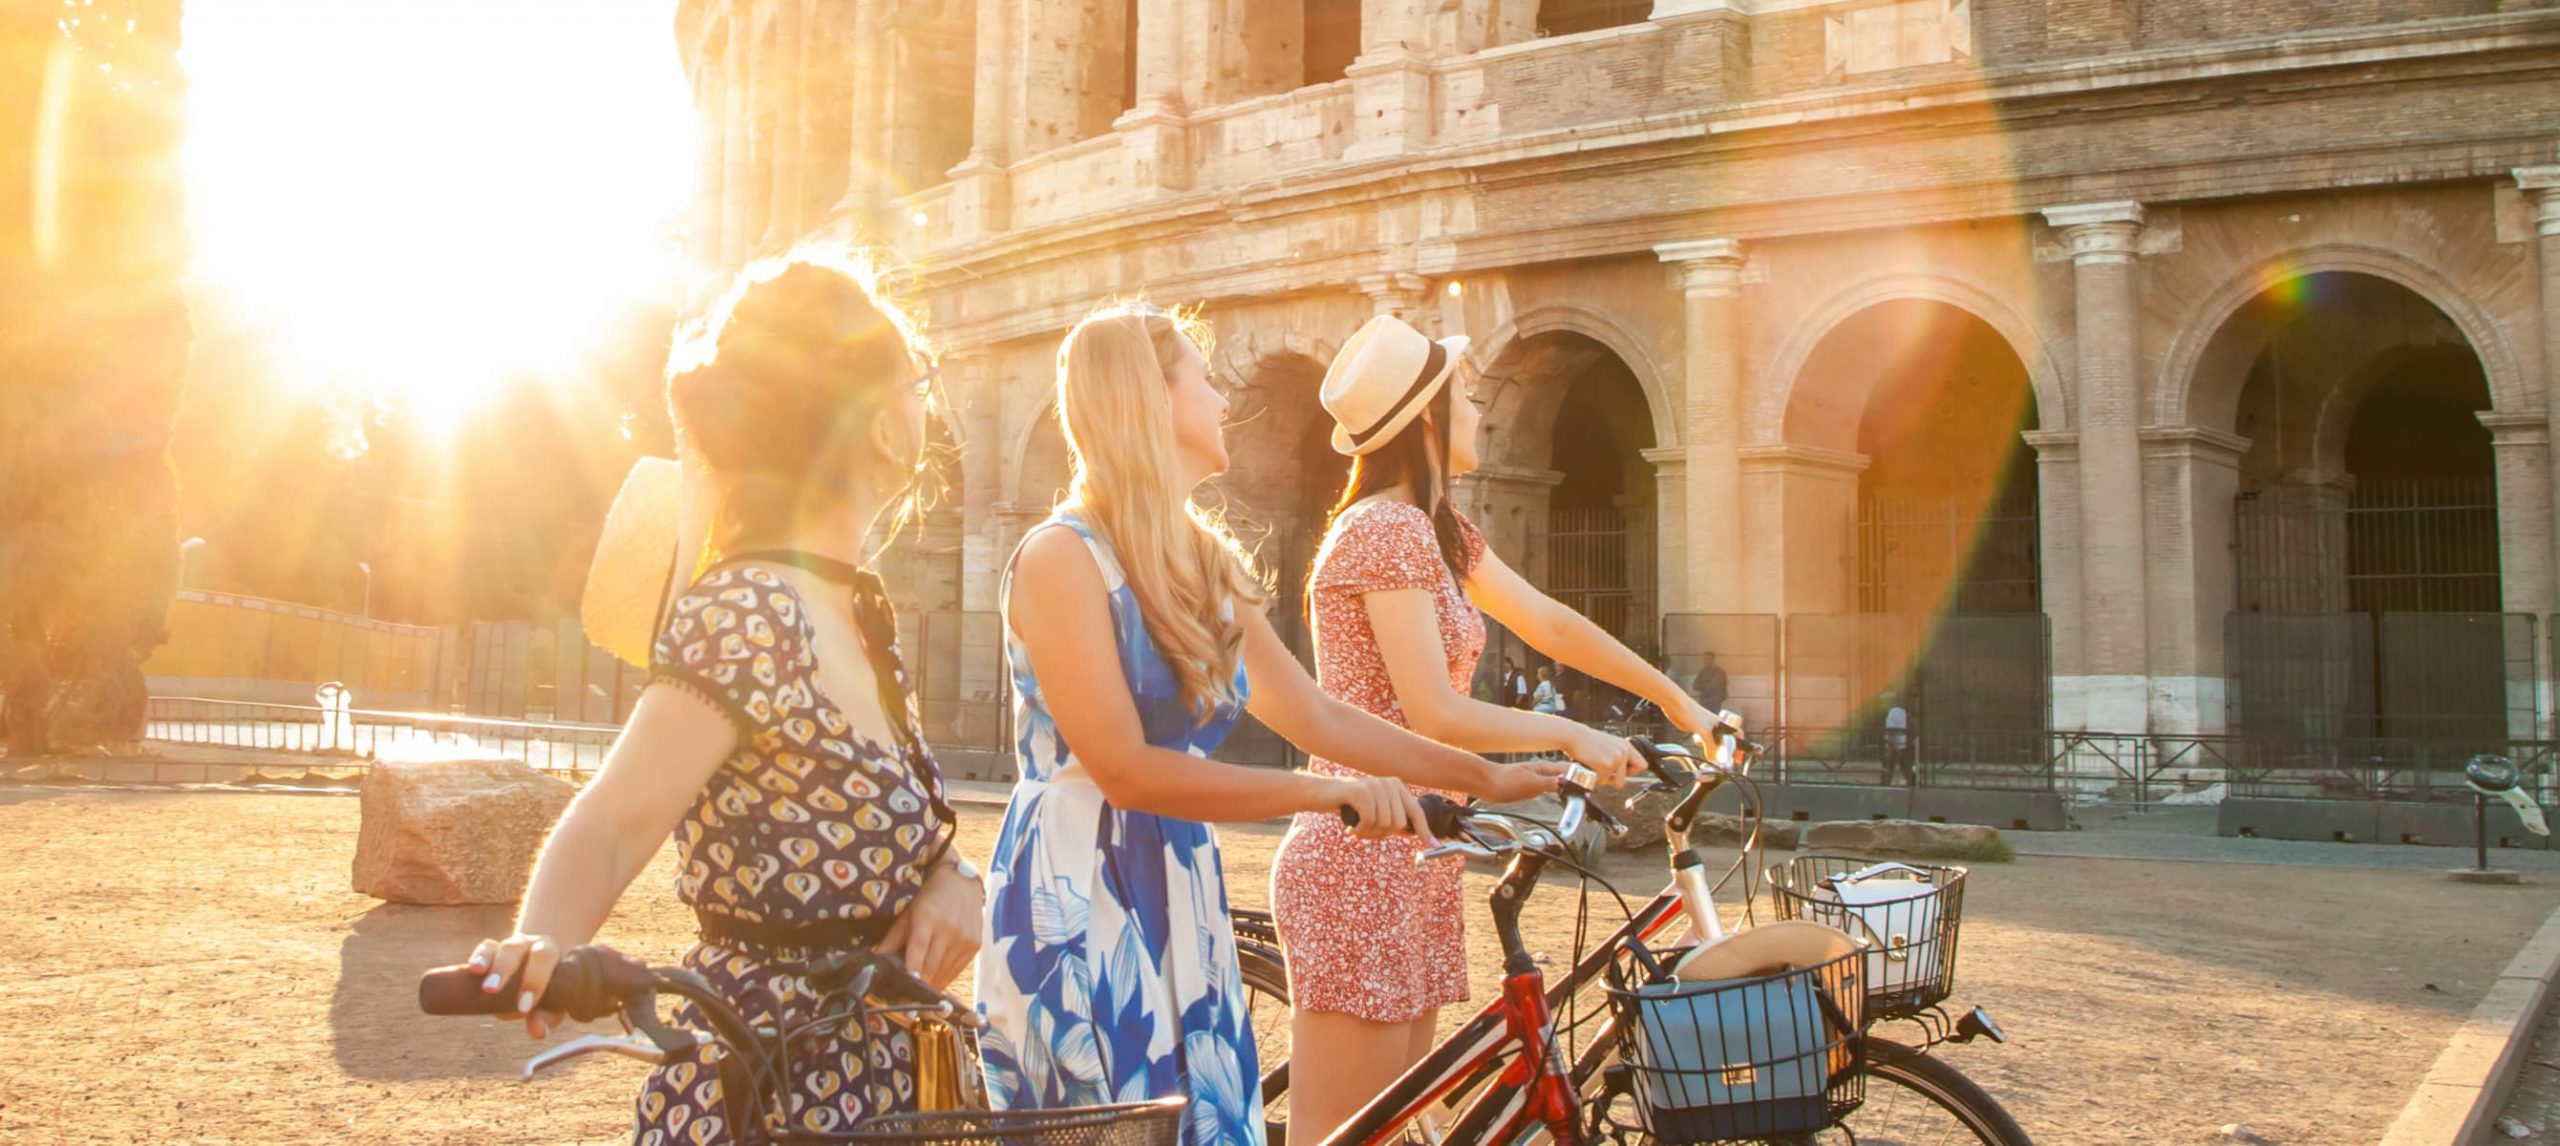 Three young woman biking in front of the Colosseum, Rome.